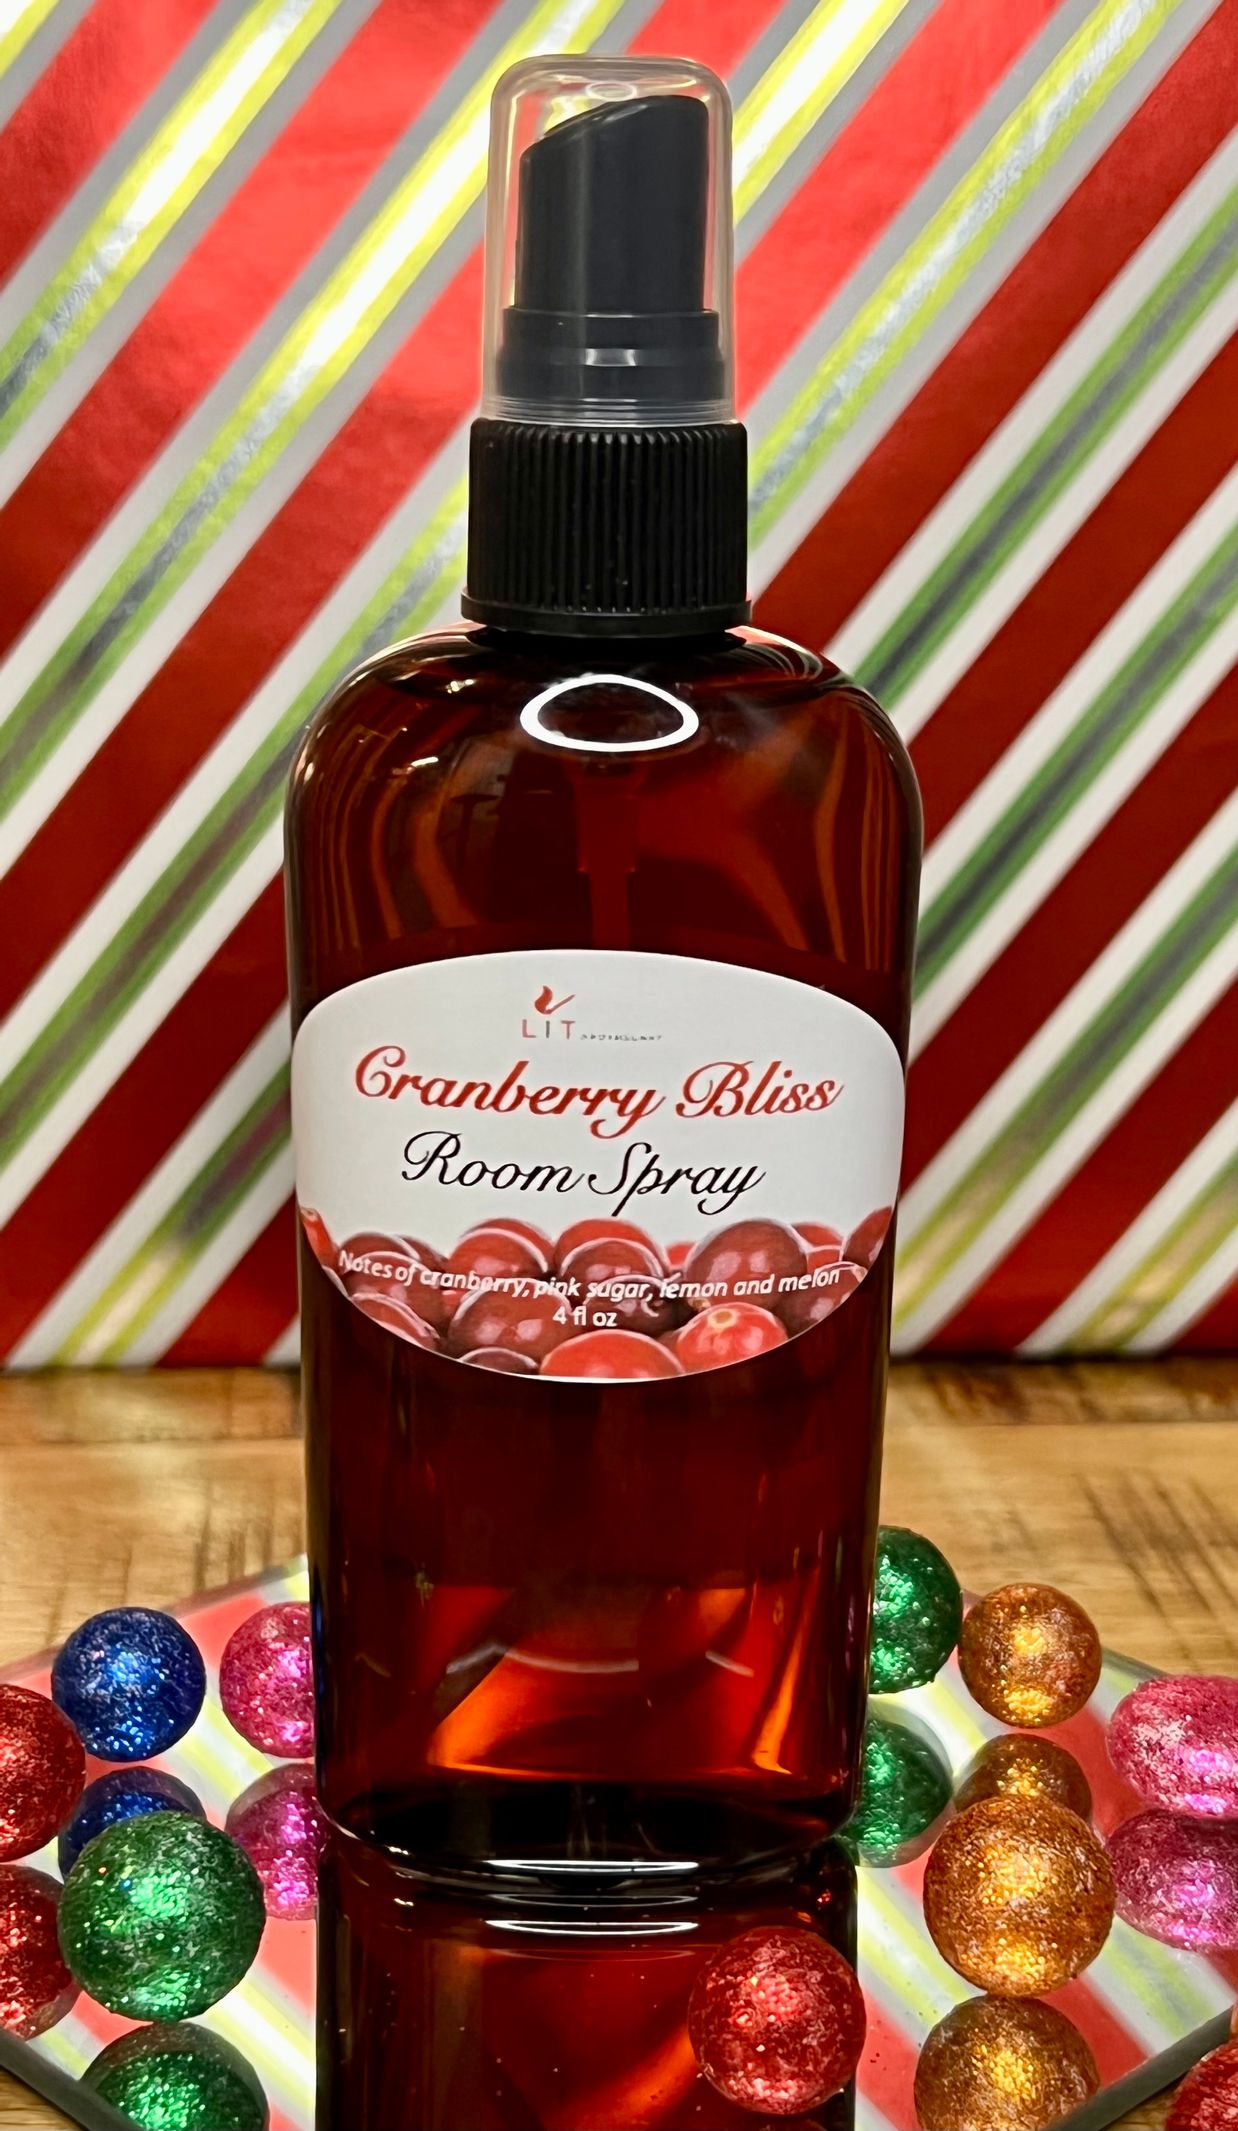 Cranberry Bliss Bundle - Cranberry Candle, Spray & Steamer